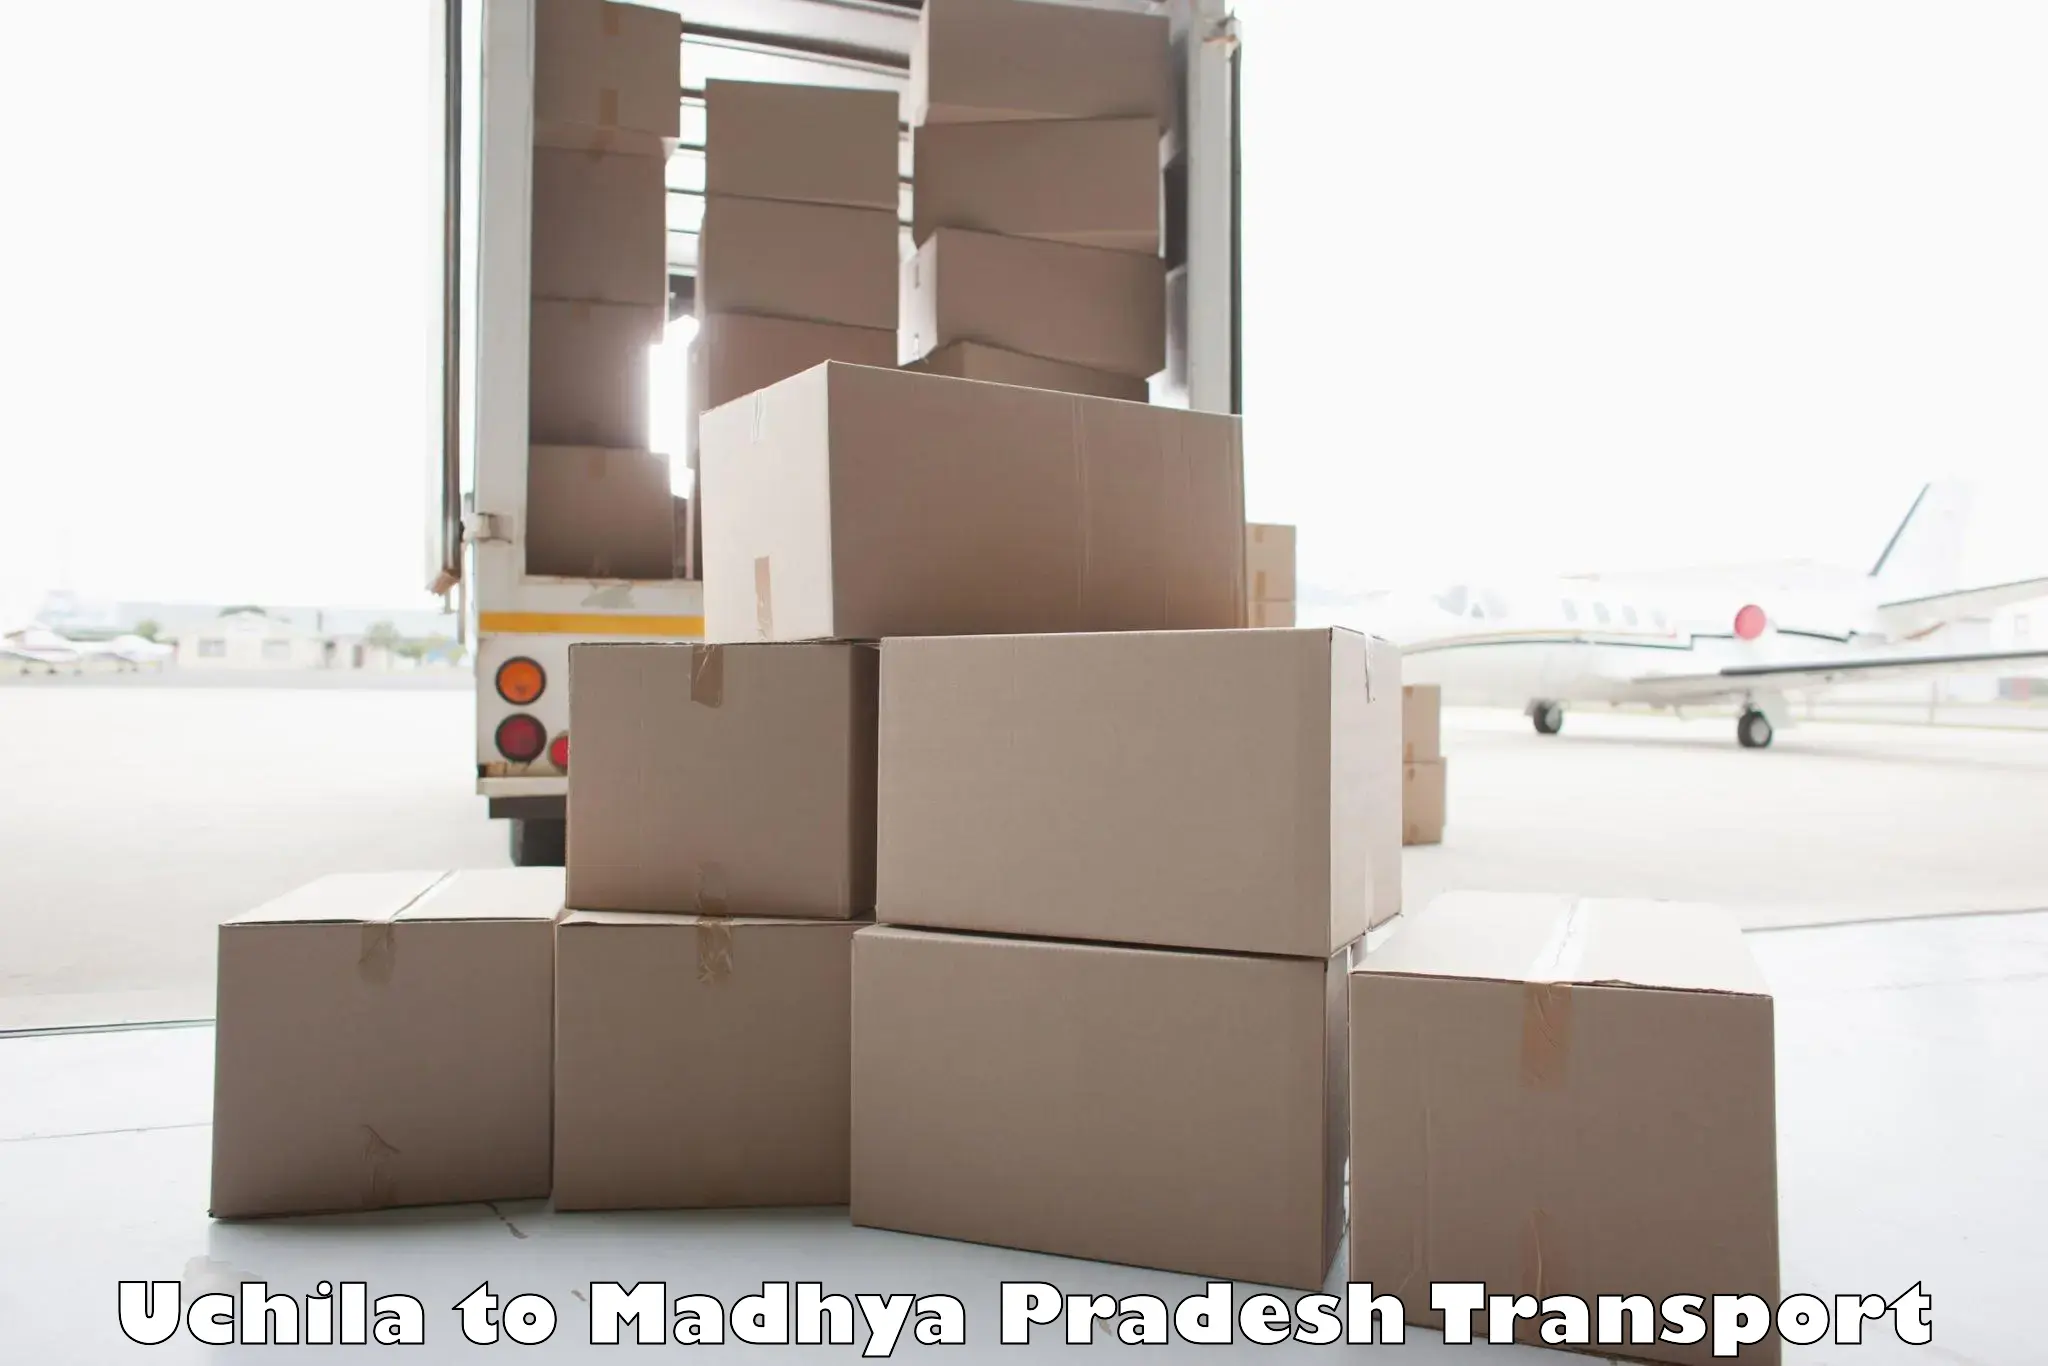 Air freight transport services in Uchila to Itarsi